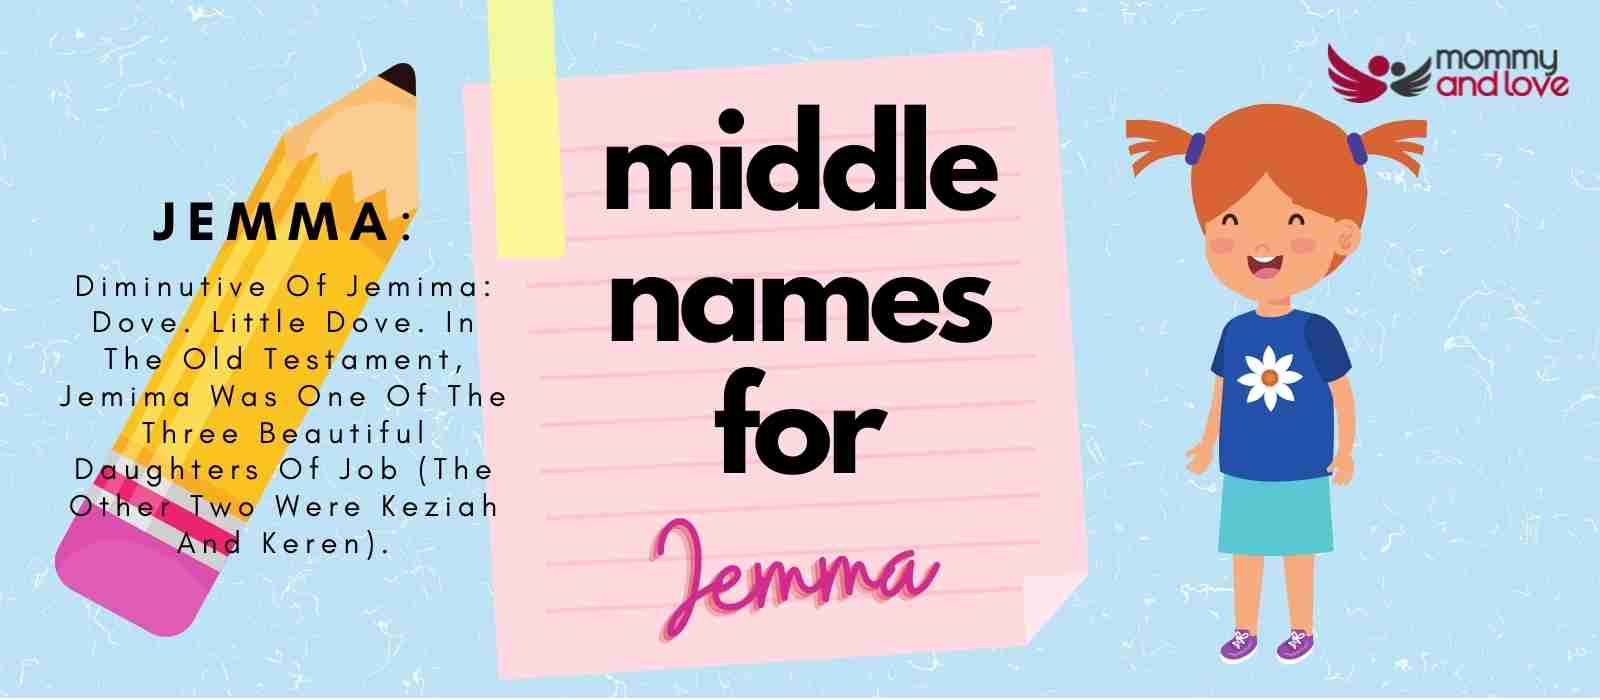 Middle Names for Jemma